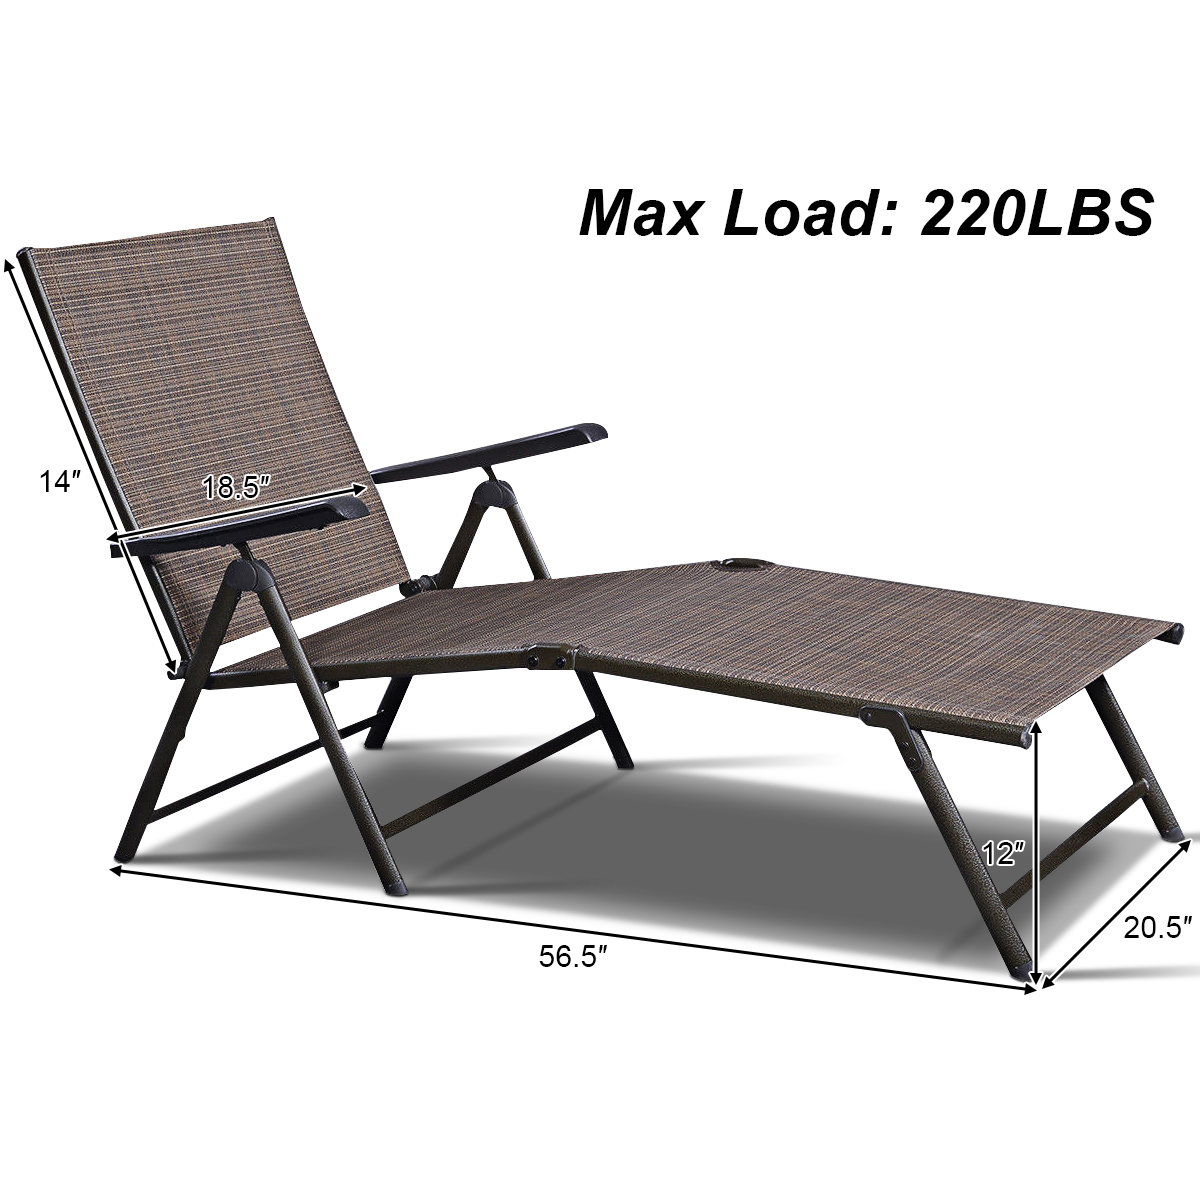 Patiojoy Chaise Lounge Adjustable Patio Poolside Recliner Chair Outdoor Steel Tan - image 2 of 8